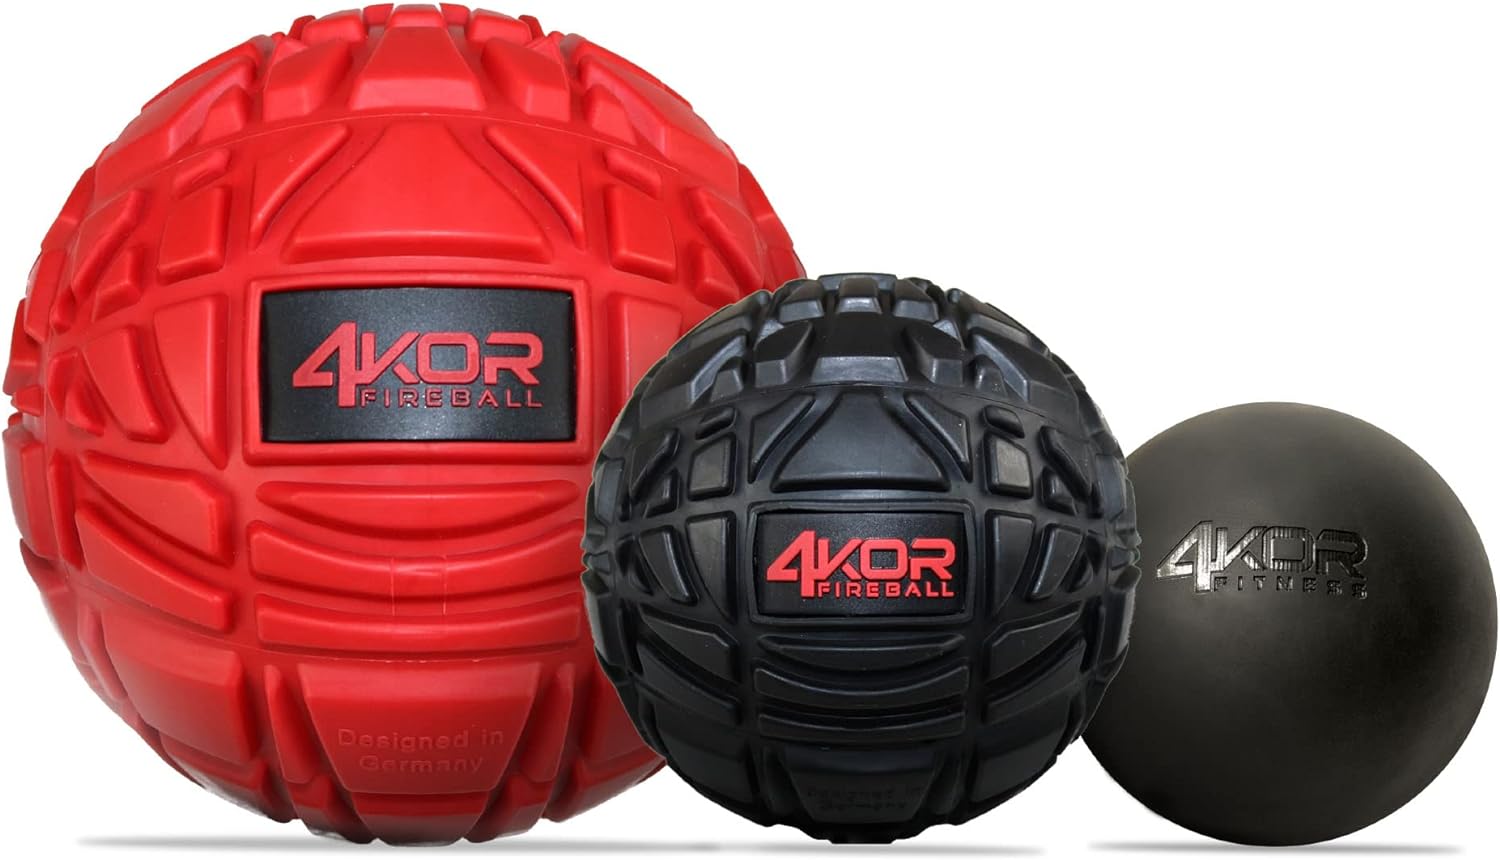 Featured Image for 4KOR Massage Ball Set – Trigger Point Ball – Muscle Relief for Back, Neck, Shoulder, Foot Pain – Fitness Orb Massage Balls – Physical Therapy for Deep Tissue Myofascial Release – Roller Ball Tools